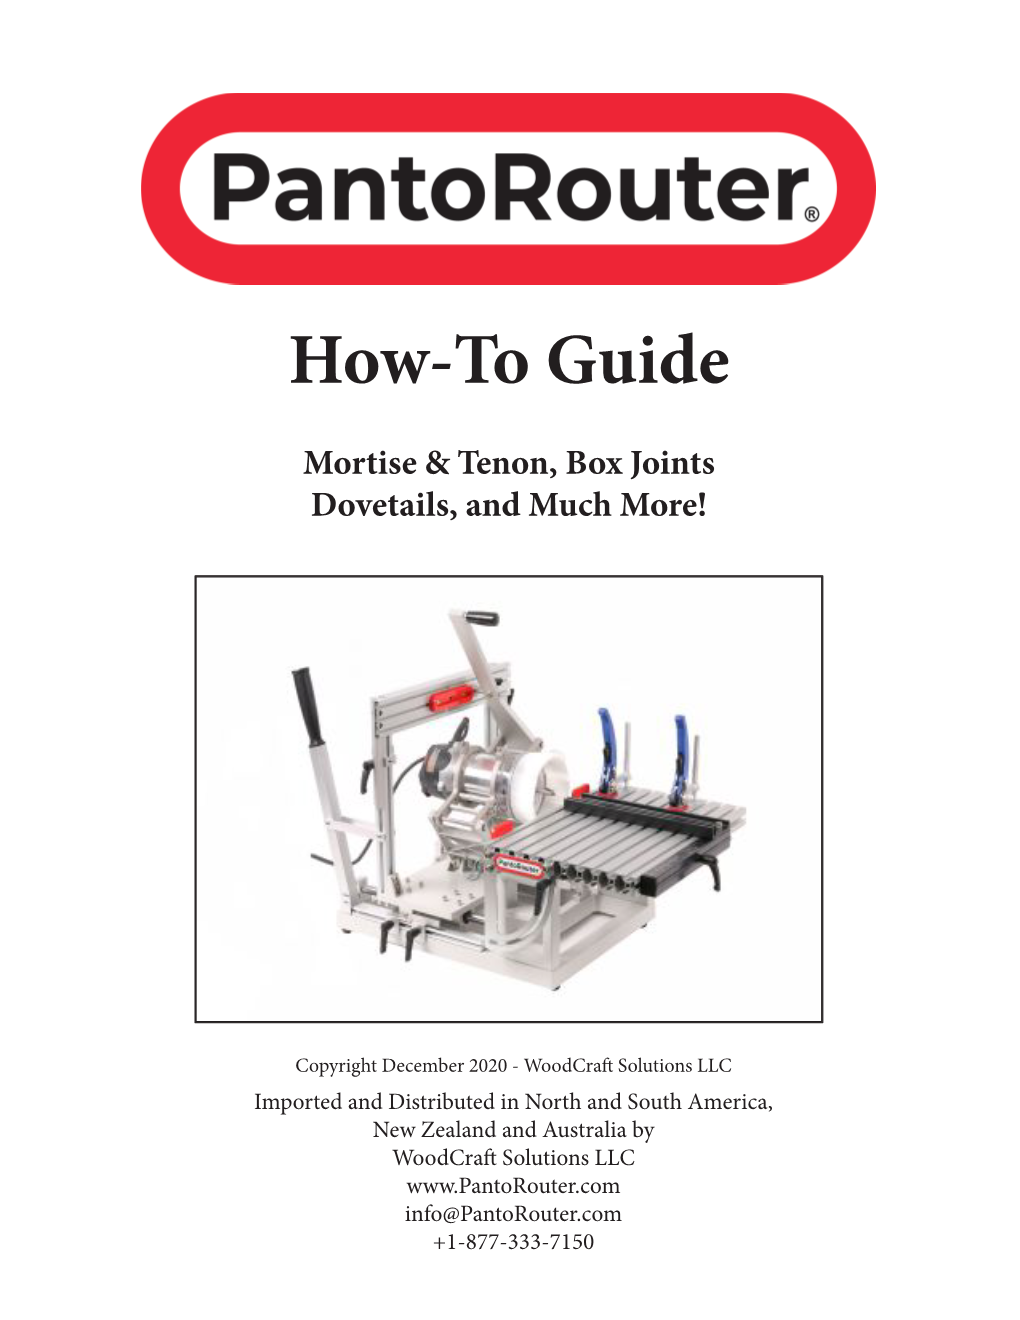 Pantorouter How-To Guide